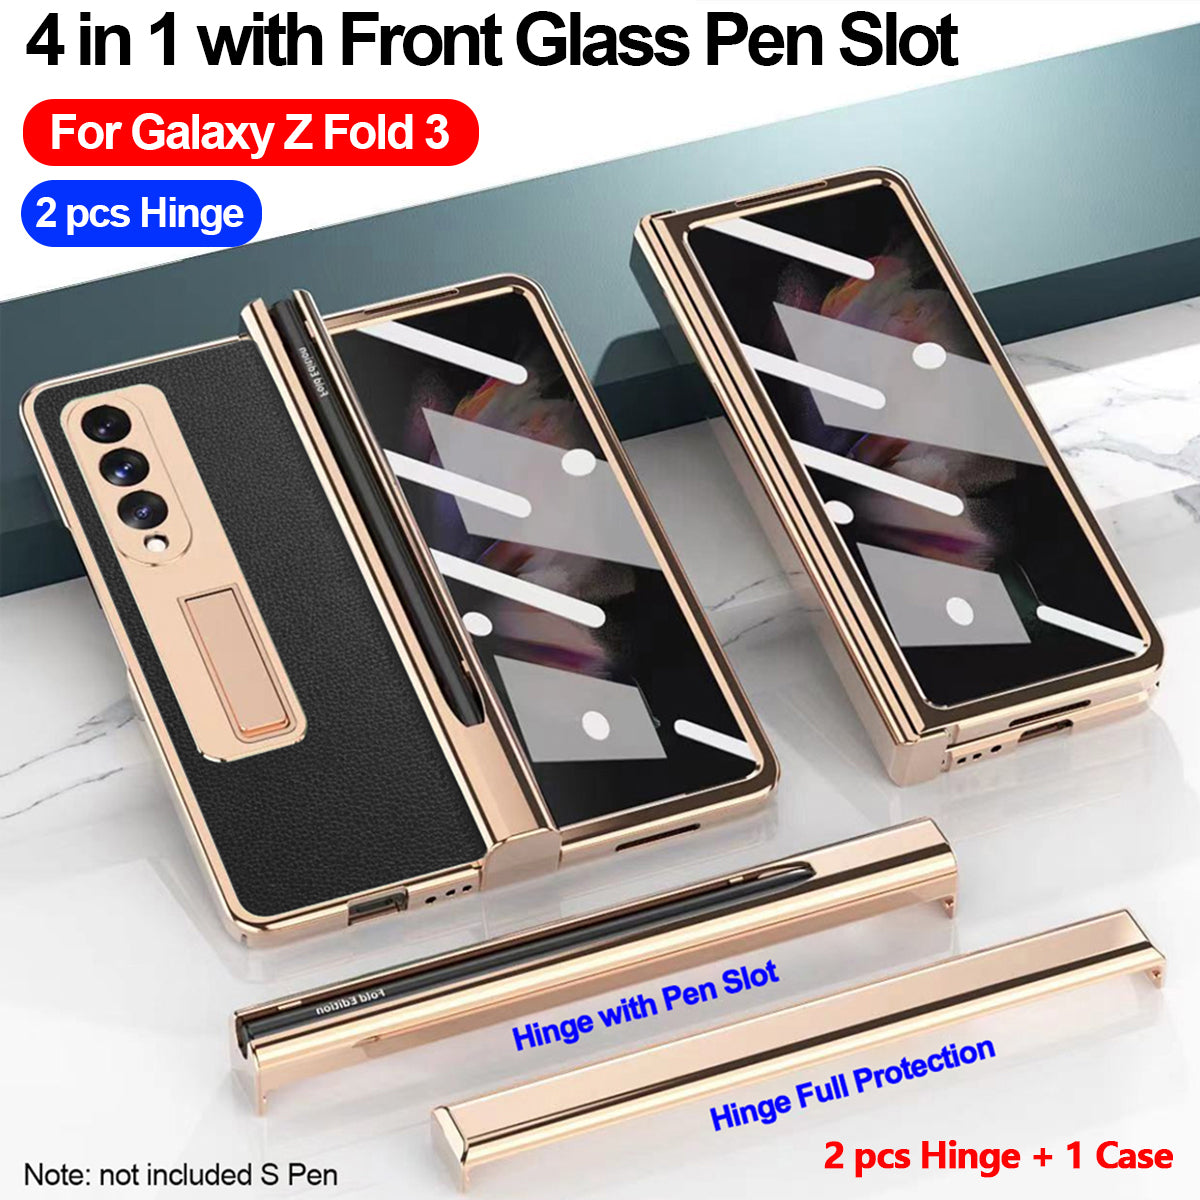 Luxury Samsung Galaxy Z Fold 3 Case Front Screen Glass Litchi Leather Cover Stand Holder 2 PCS Hinge